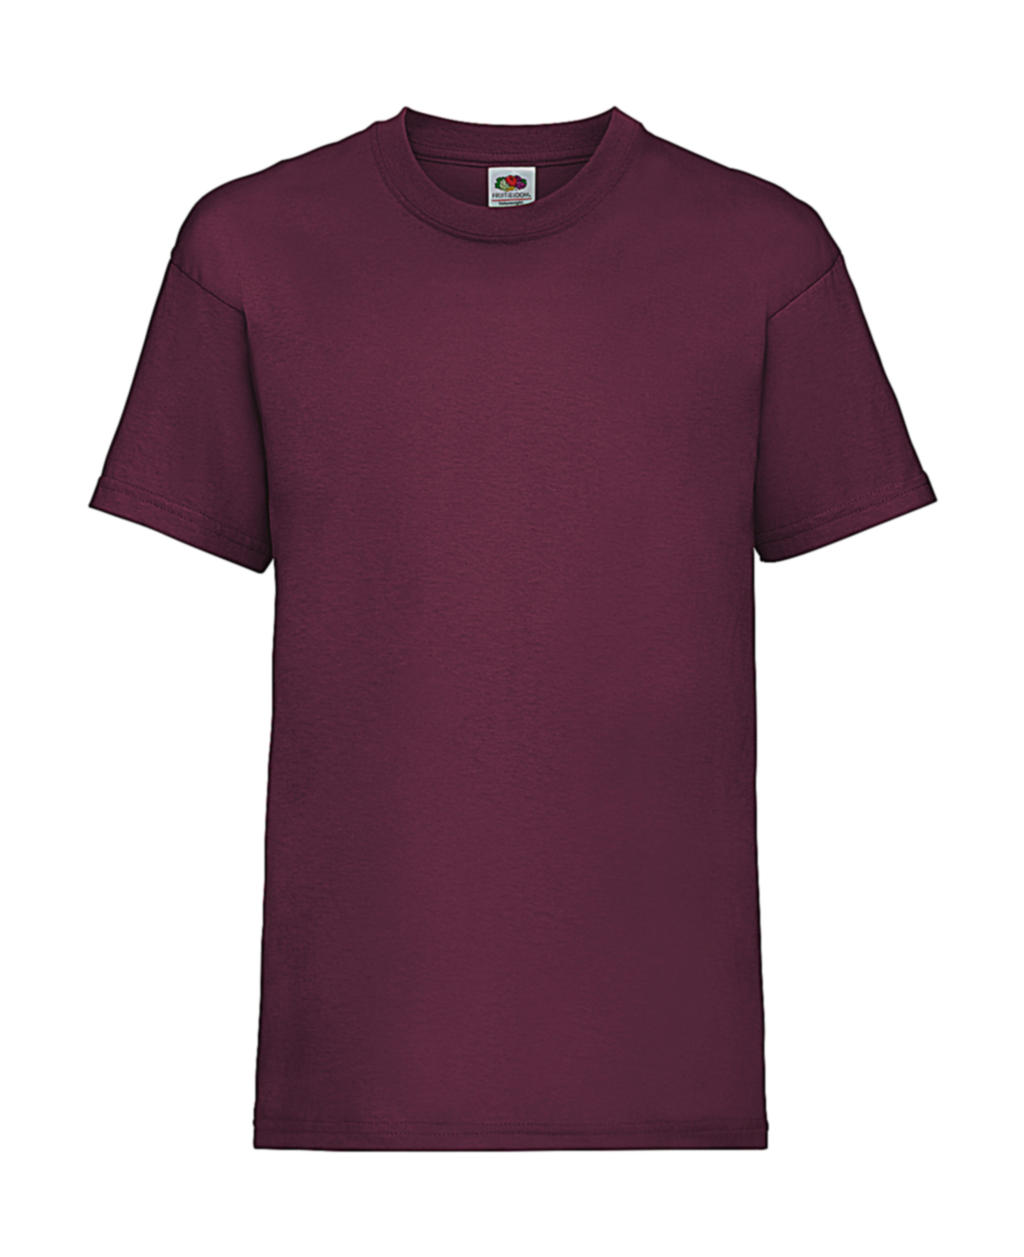  Kids Valueweight T in Farbe Burgundy